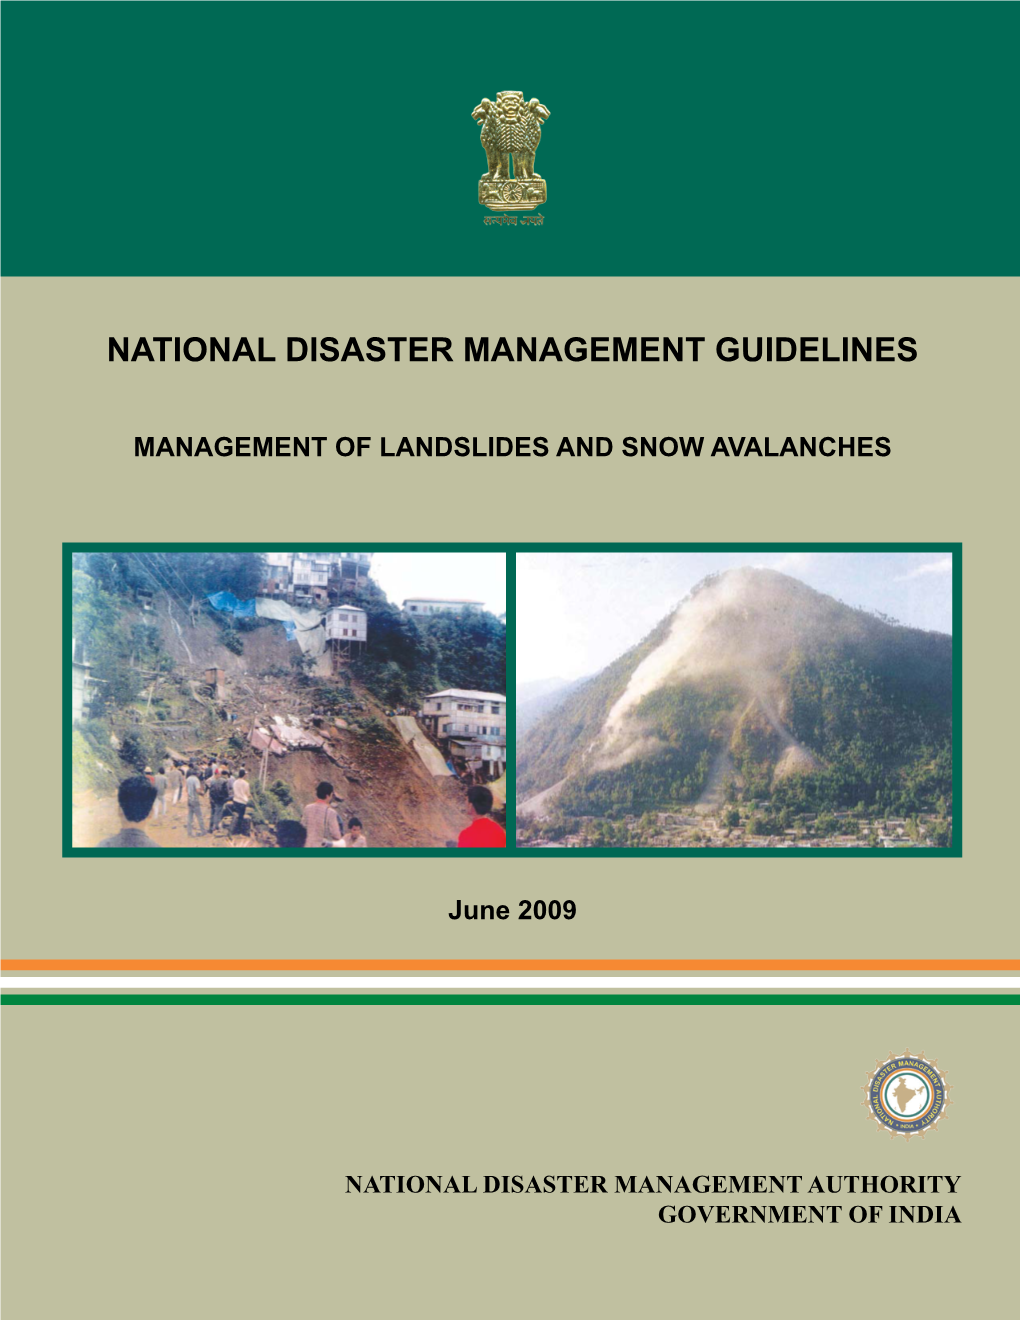 Guidelines on Landslide and Snow Avalanches